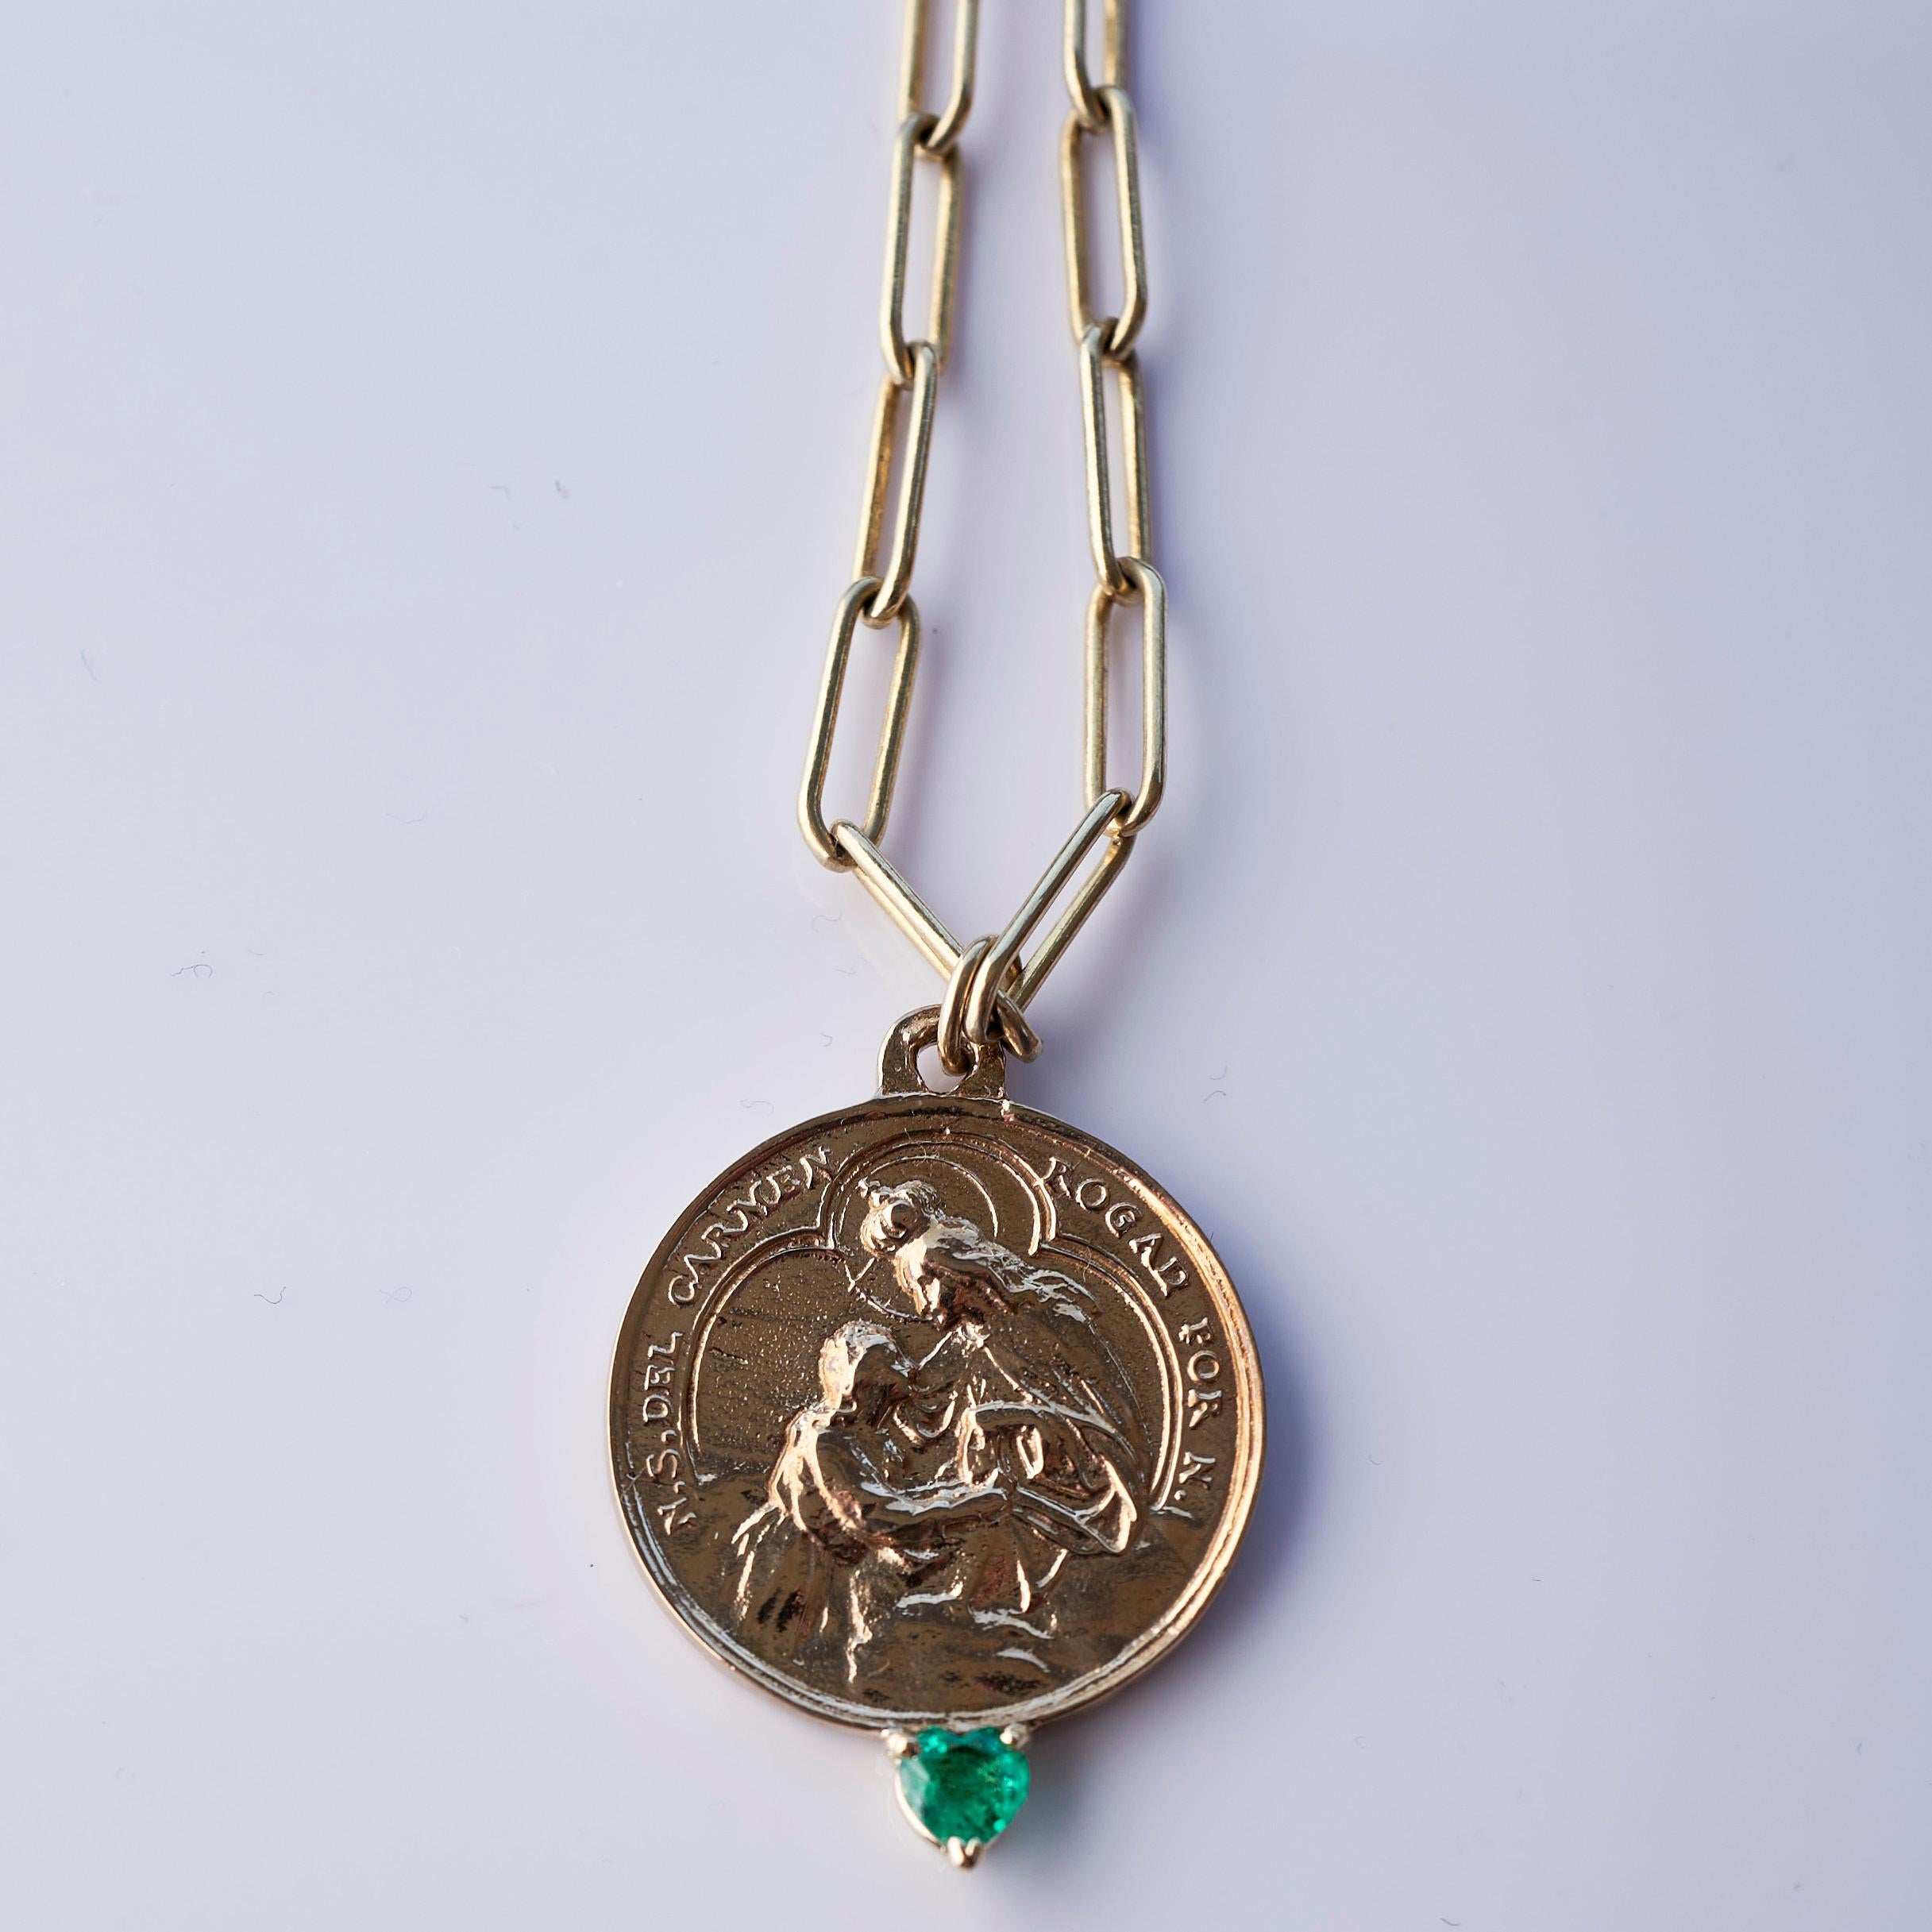 Emerald Heart Medal Necklace Chain Virgin Mary Pendant J Dauphin In New Condition For Sale In Los Angeles, CA